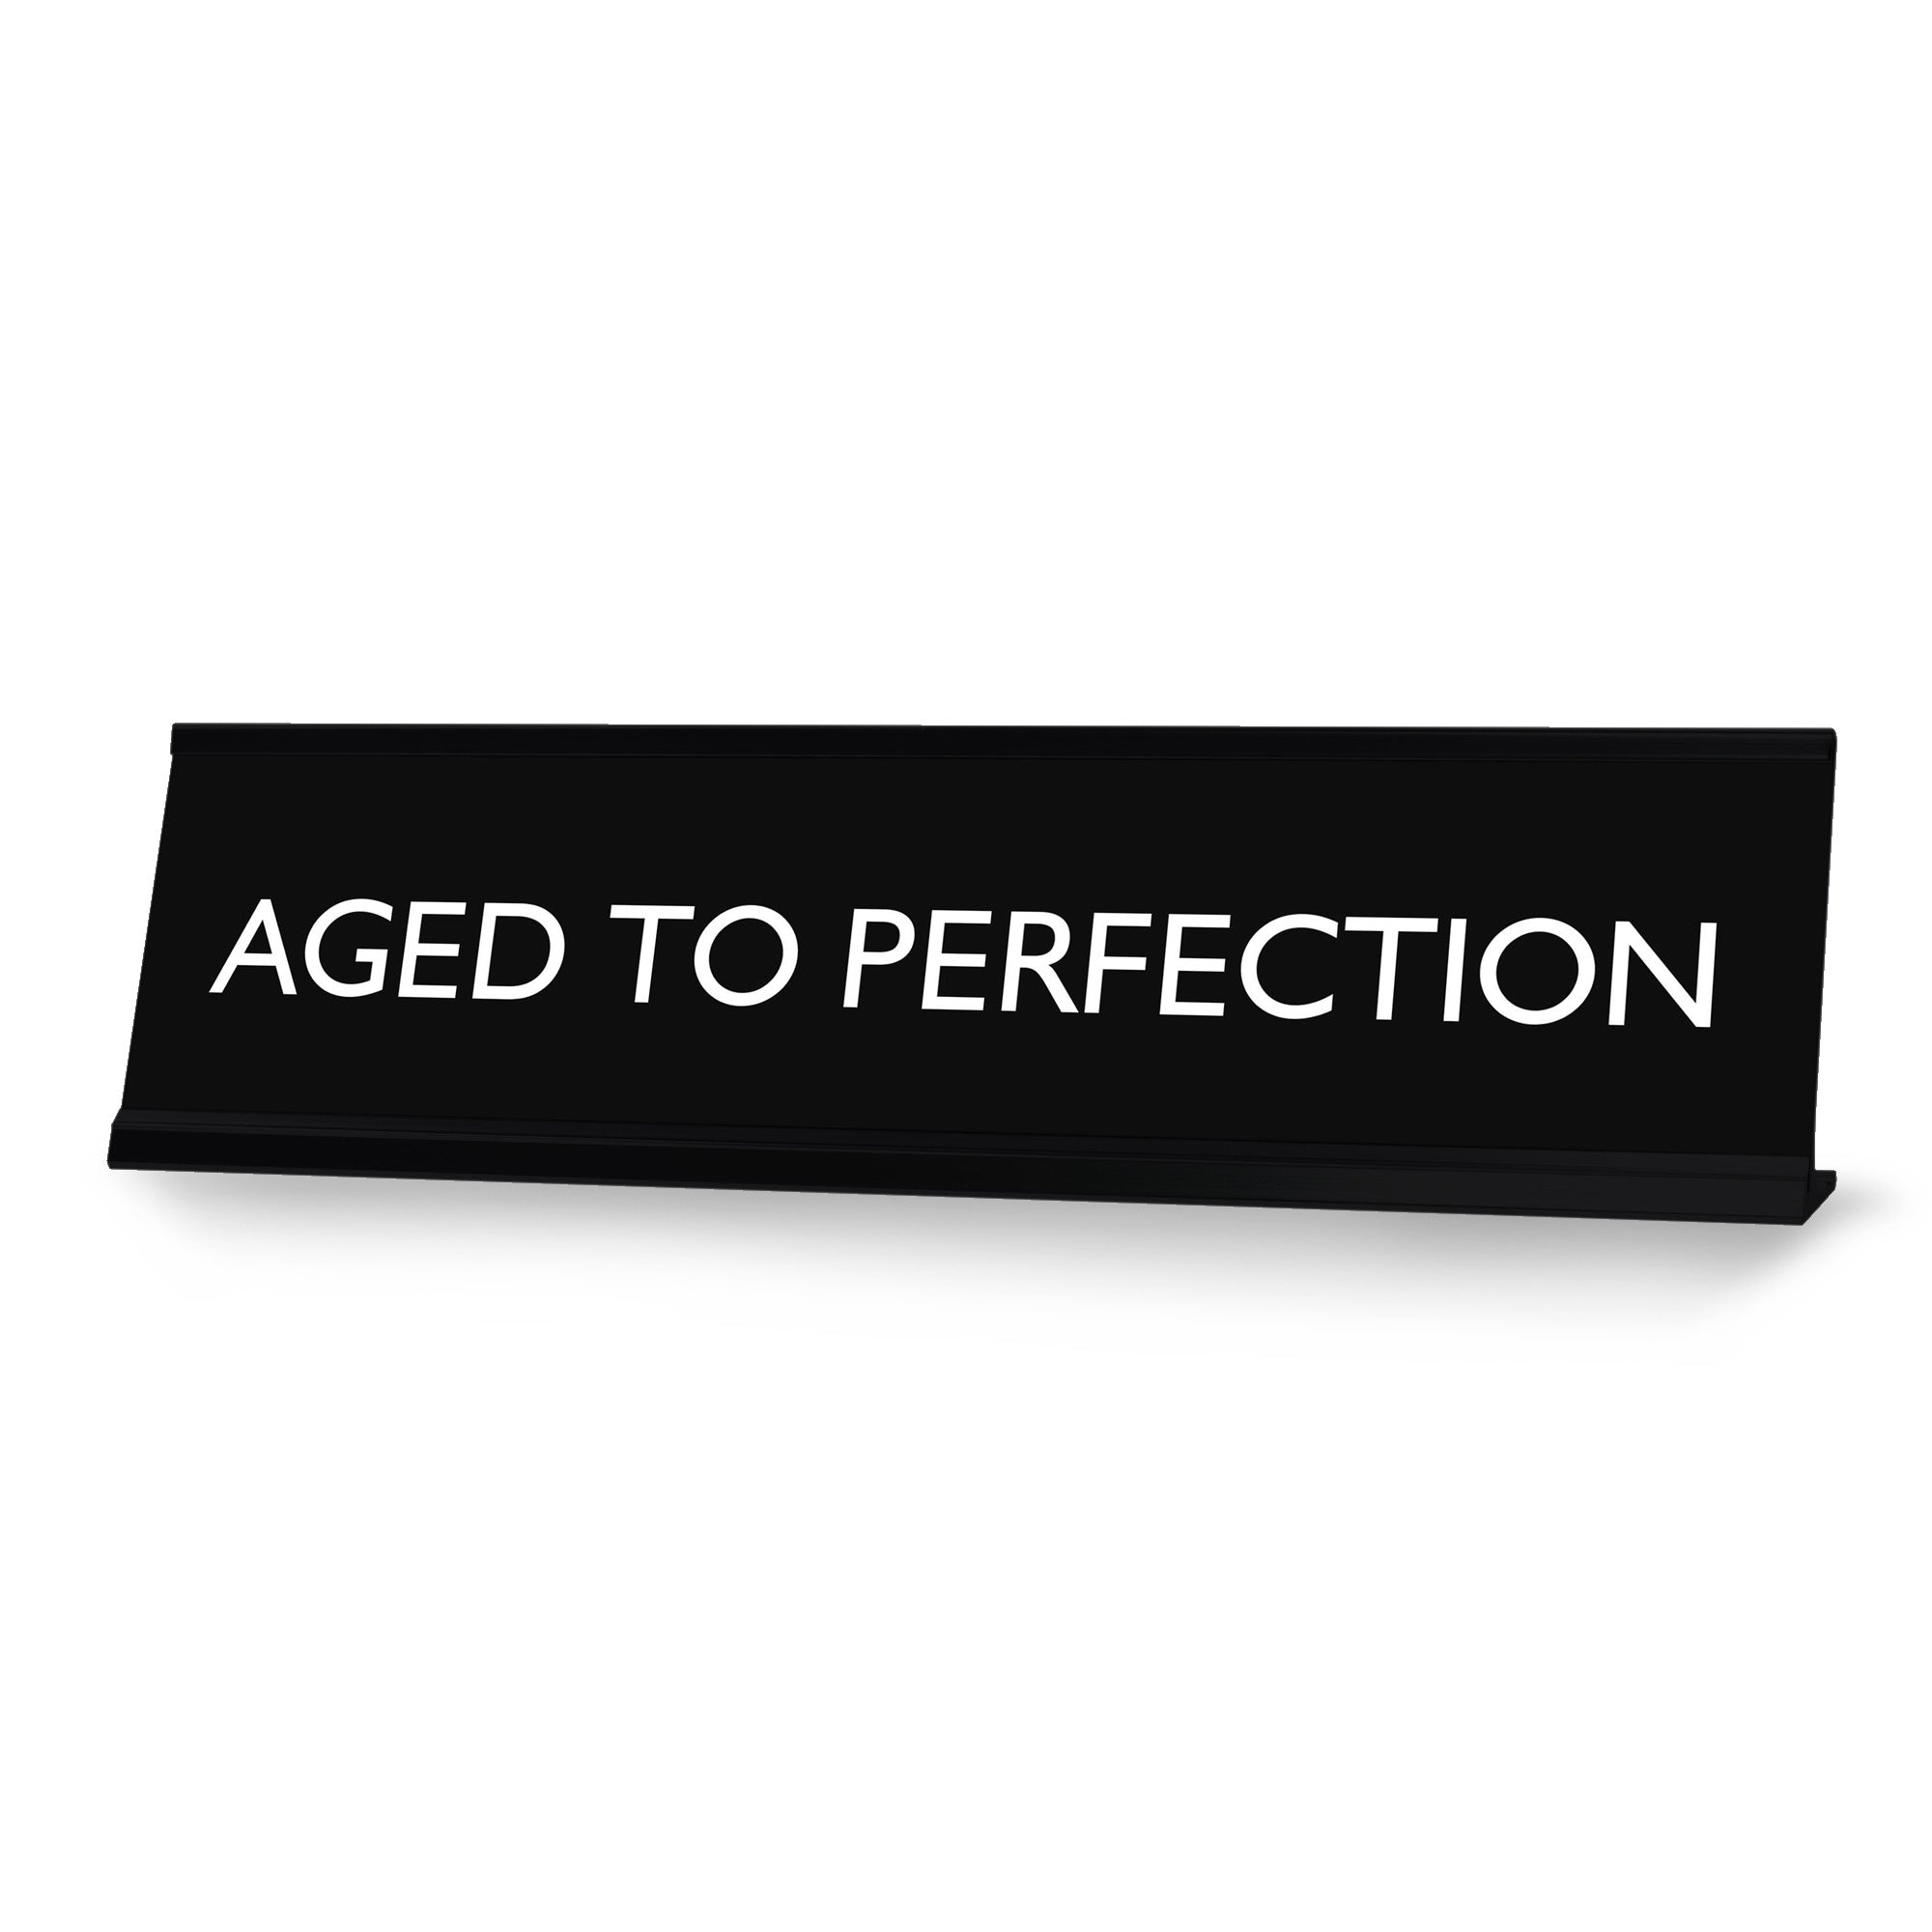 AGED TO PERFECTION Novelty Desk Sign